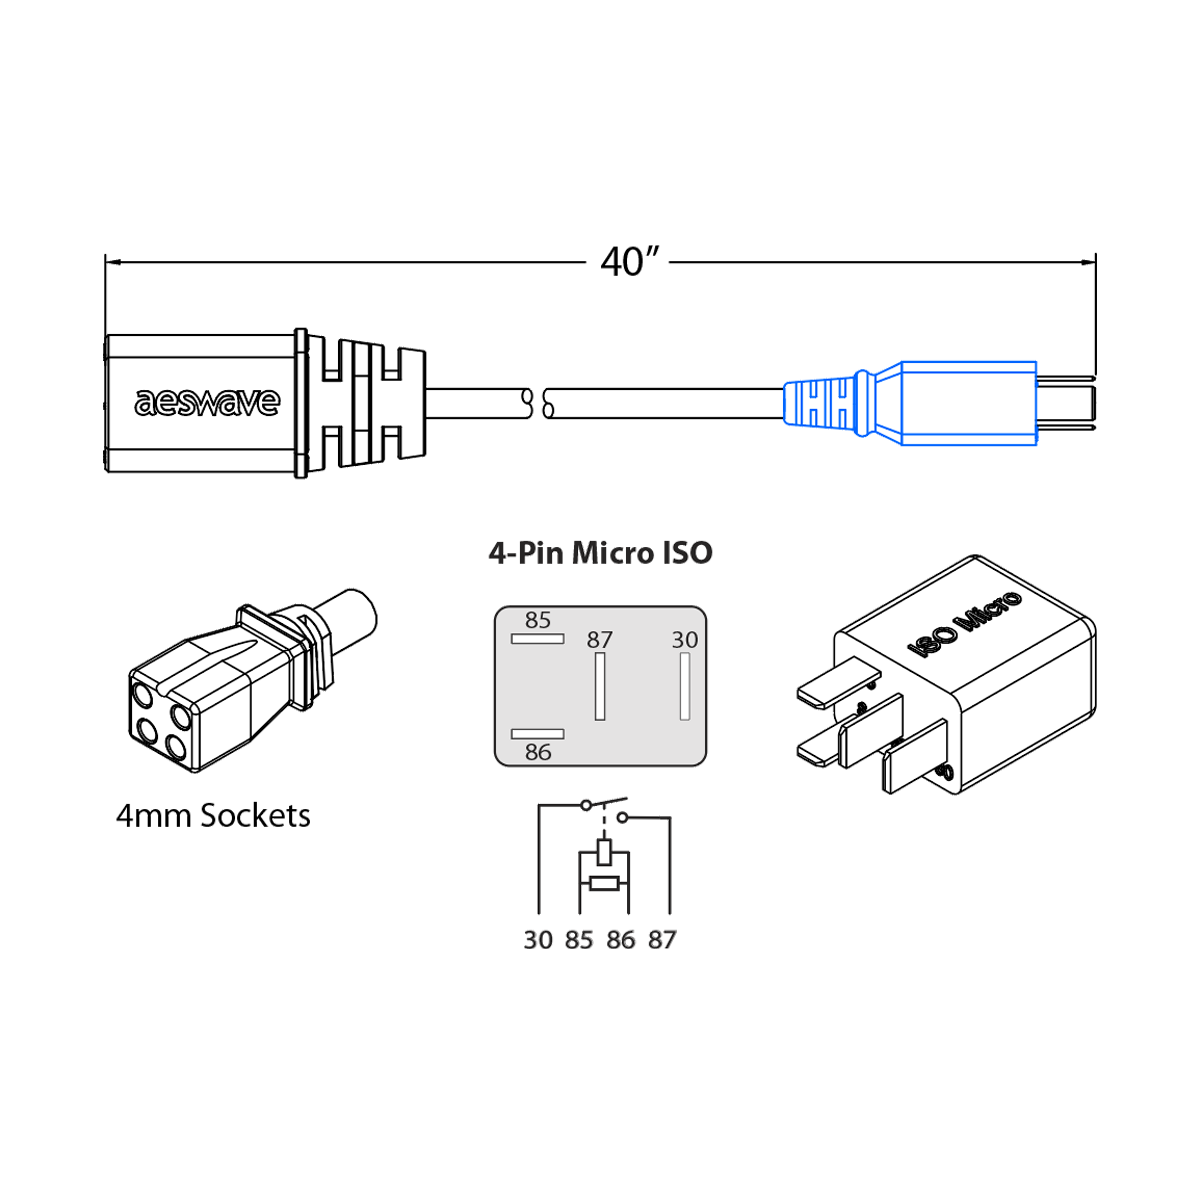 uActivate 4-Pin ISO Micro Cable Specifications